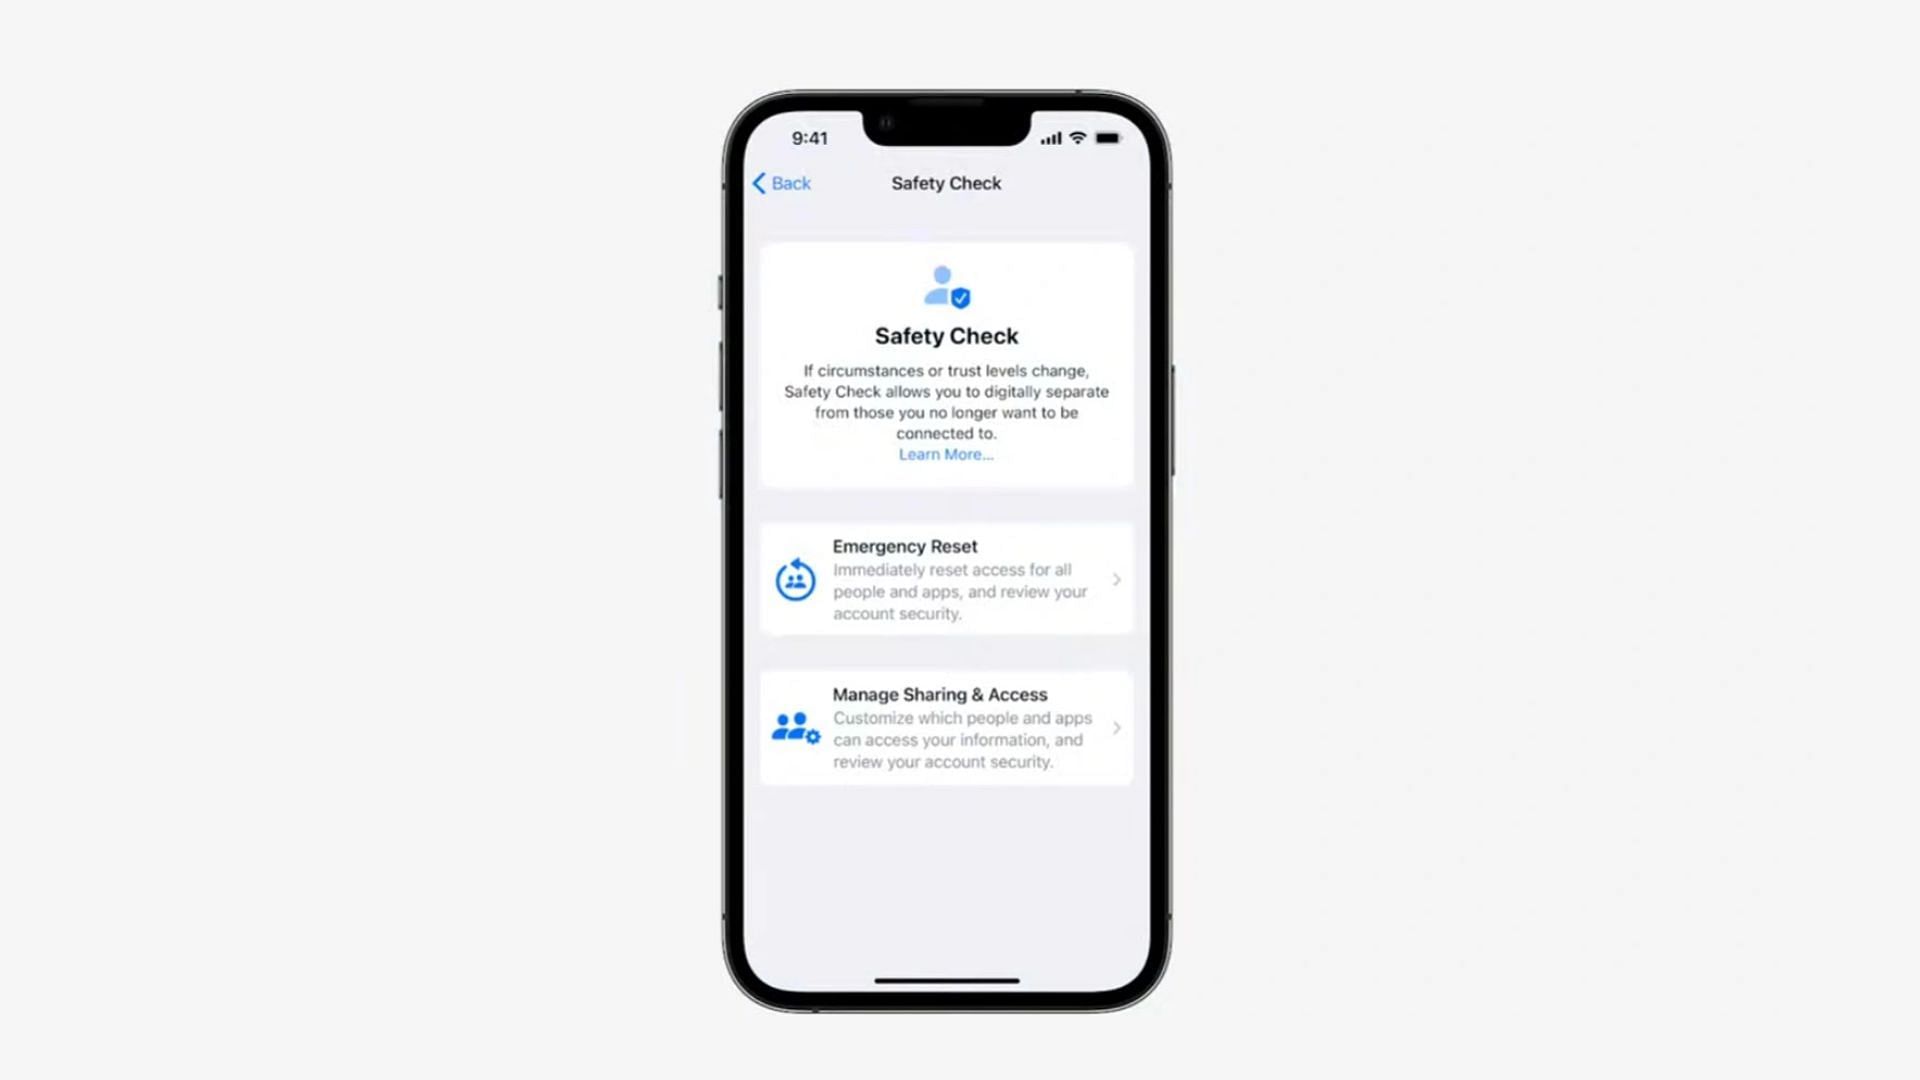 Safety Check in Apple iPhone devices (Image via Apple)